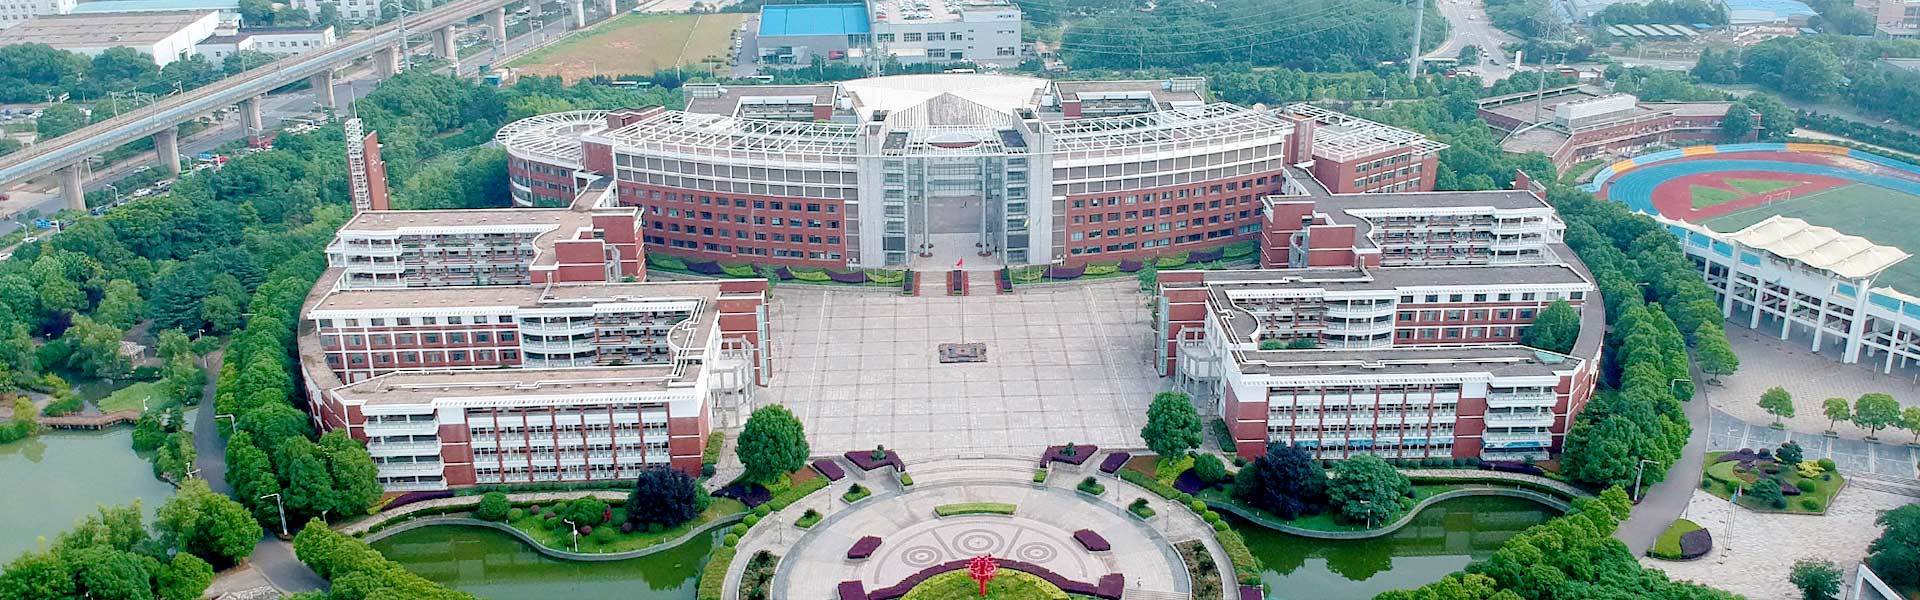 The No. 1 Affiliated Middle School of Huazhong Normal University